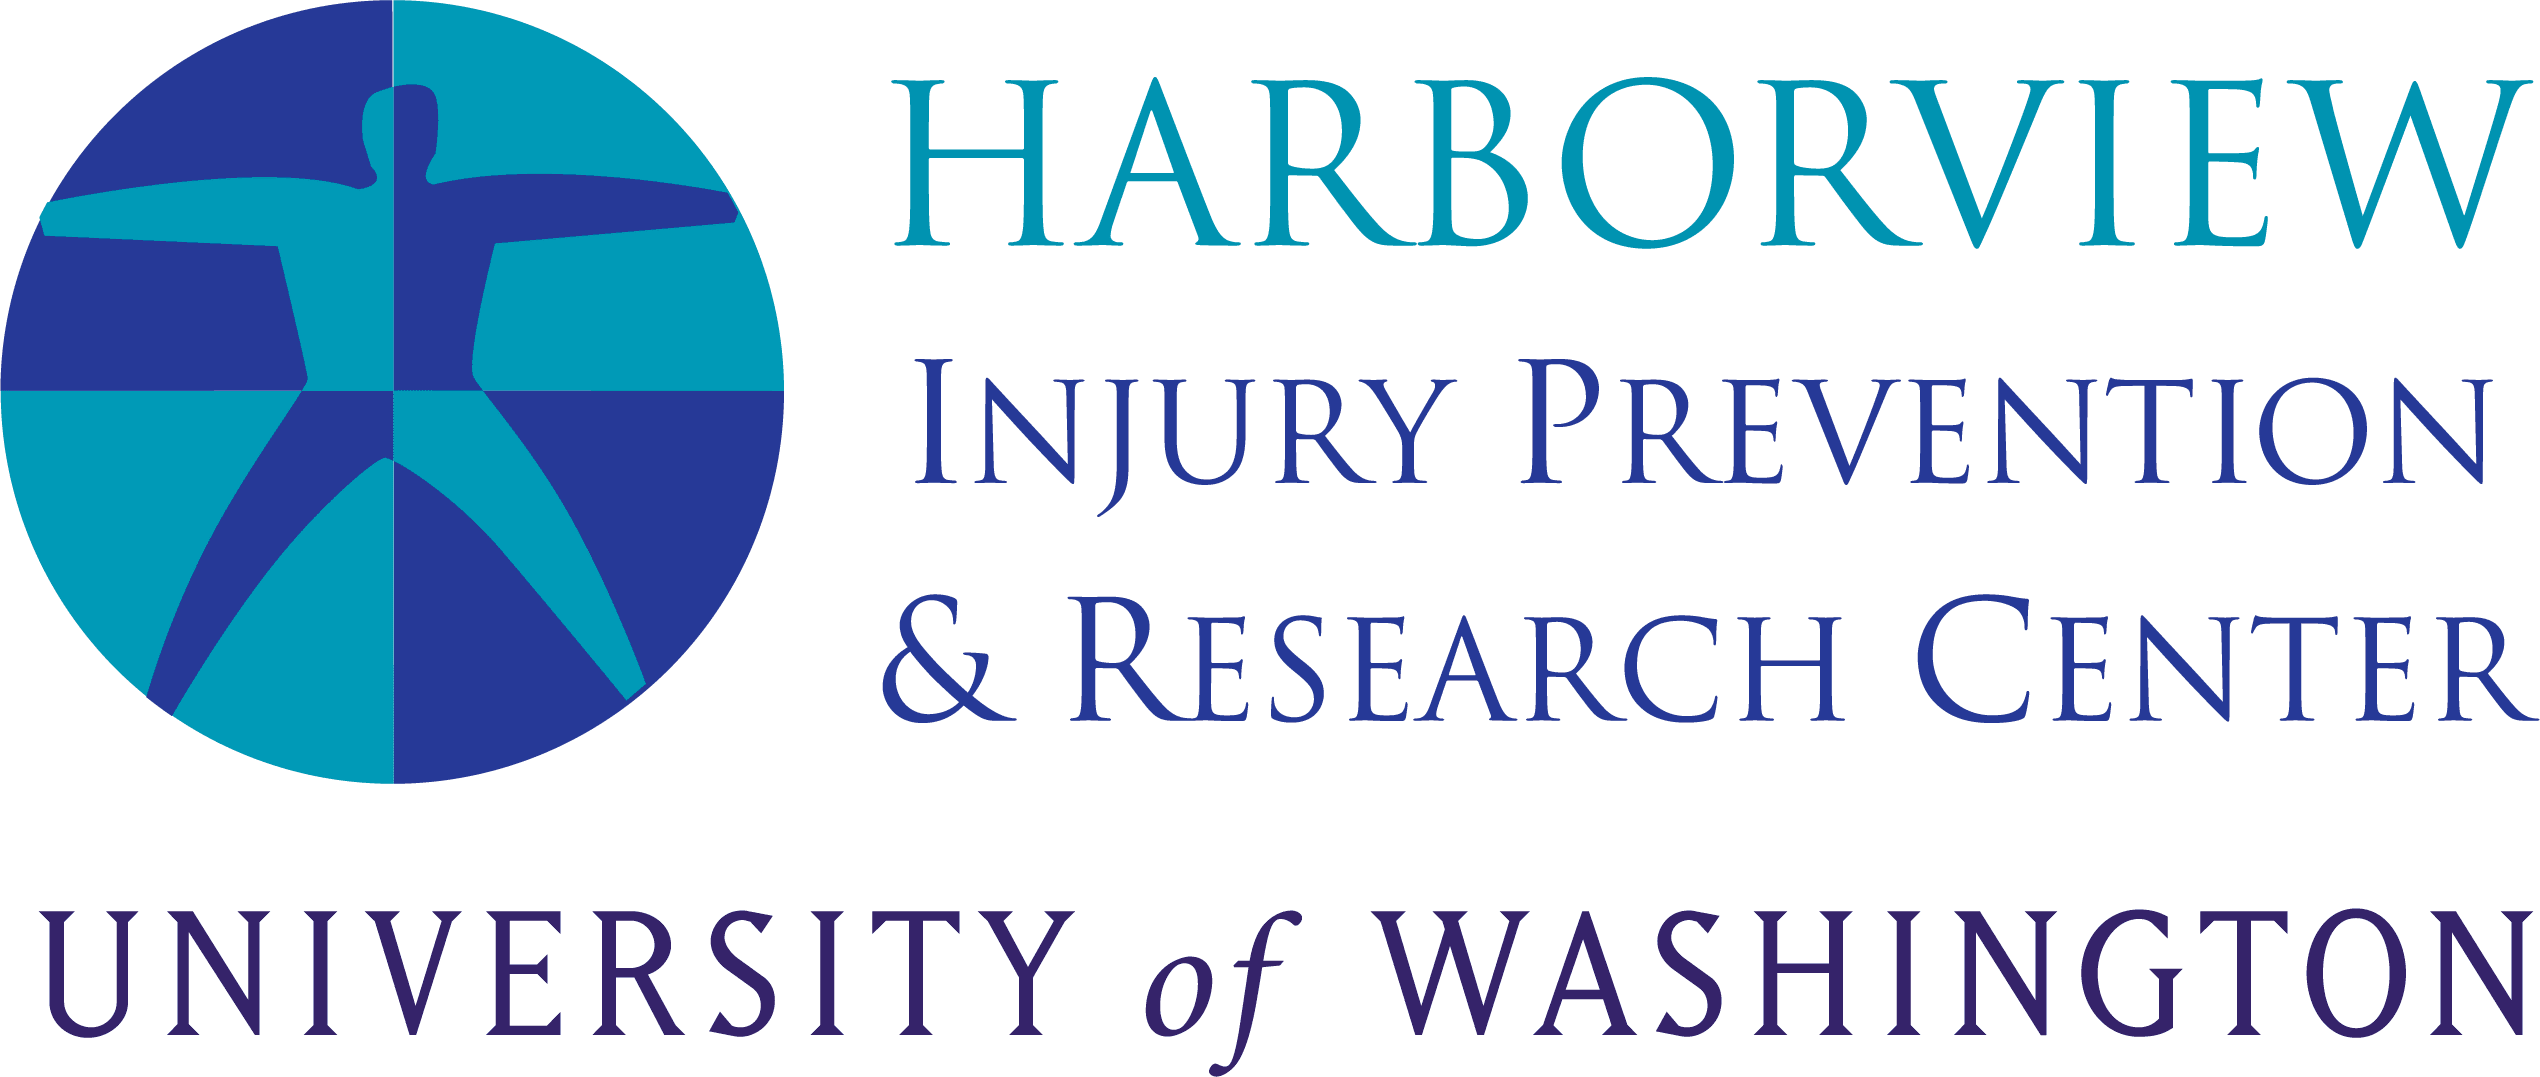 HIPRC News Archives - Page 8 of 40 - Harborview Injury Prevention &  Research Center